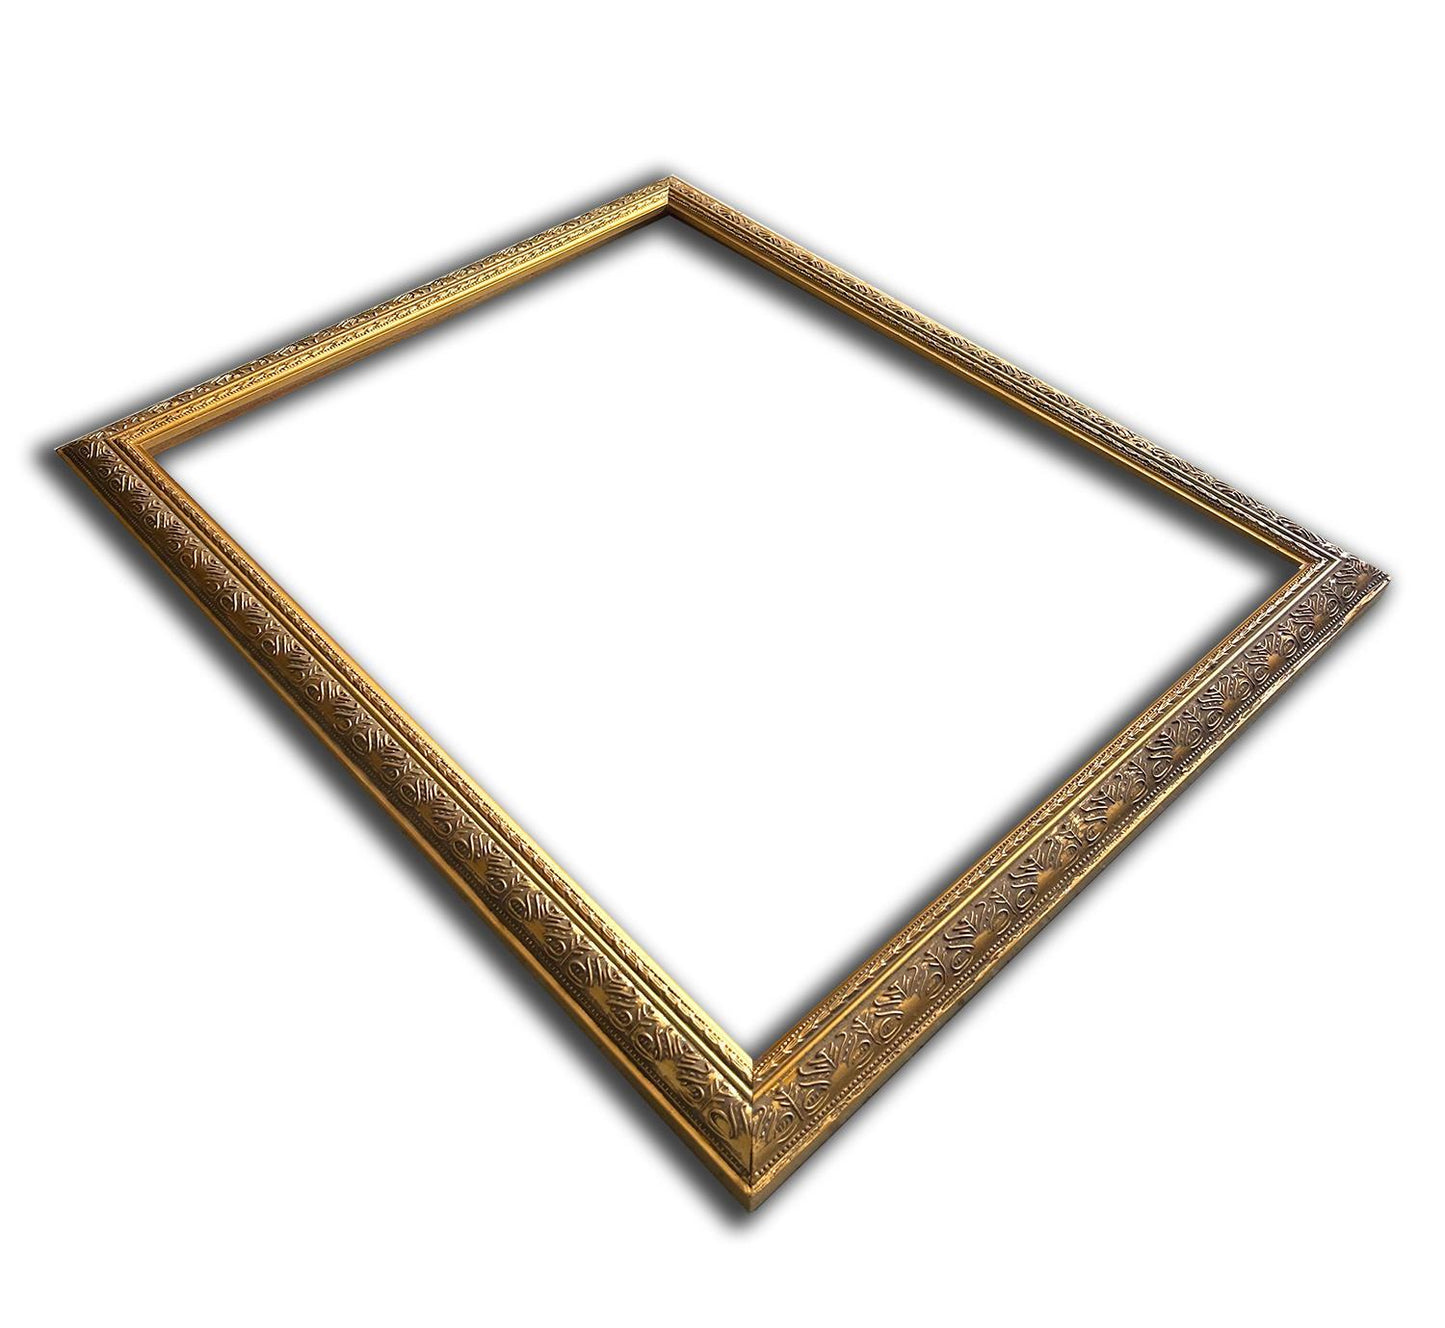 40x50 cm or 16x20 ins, wooden photo frame